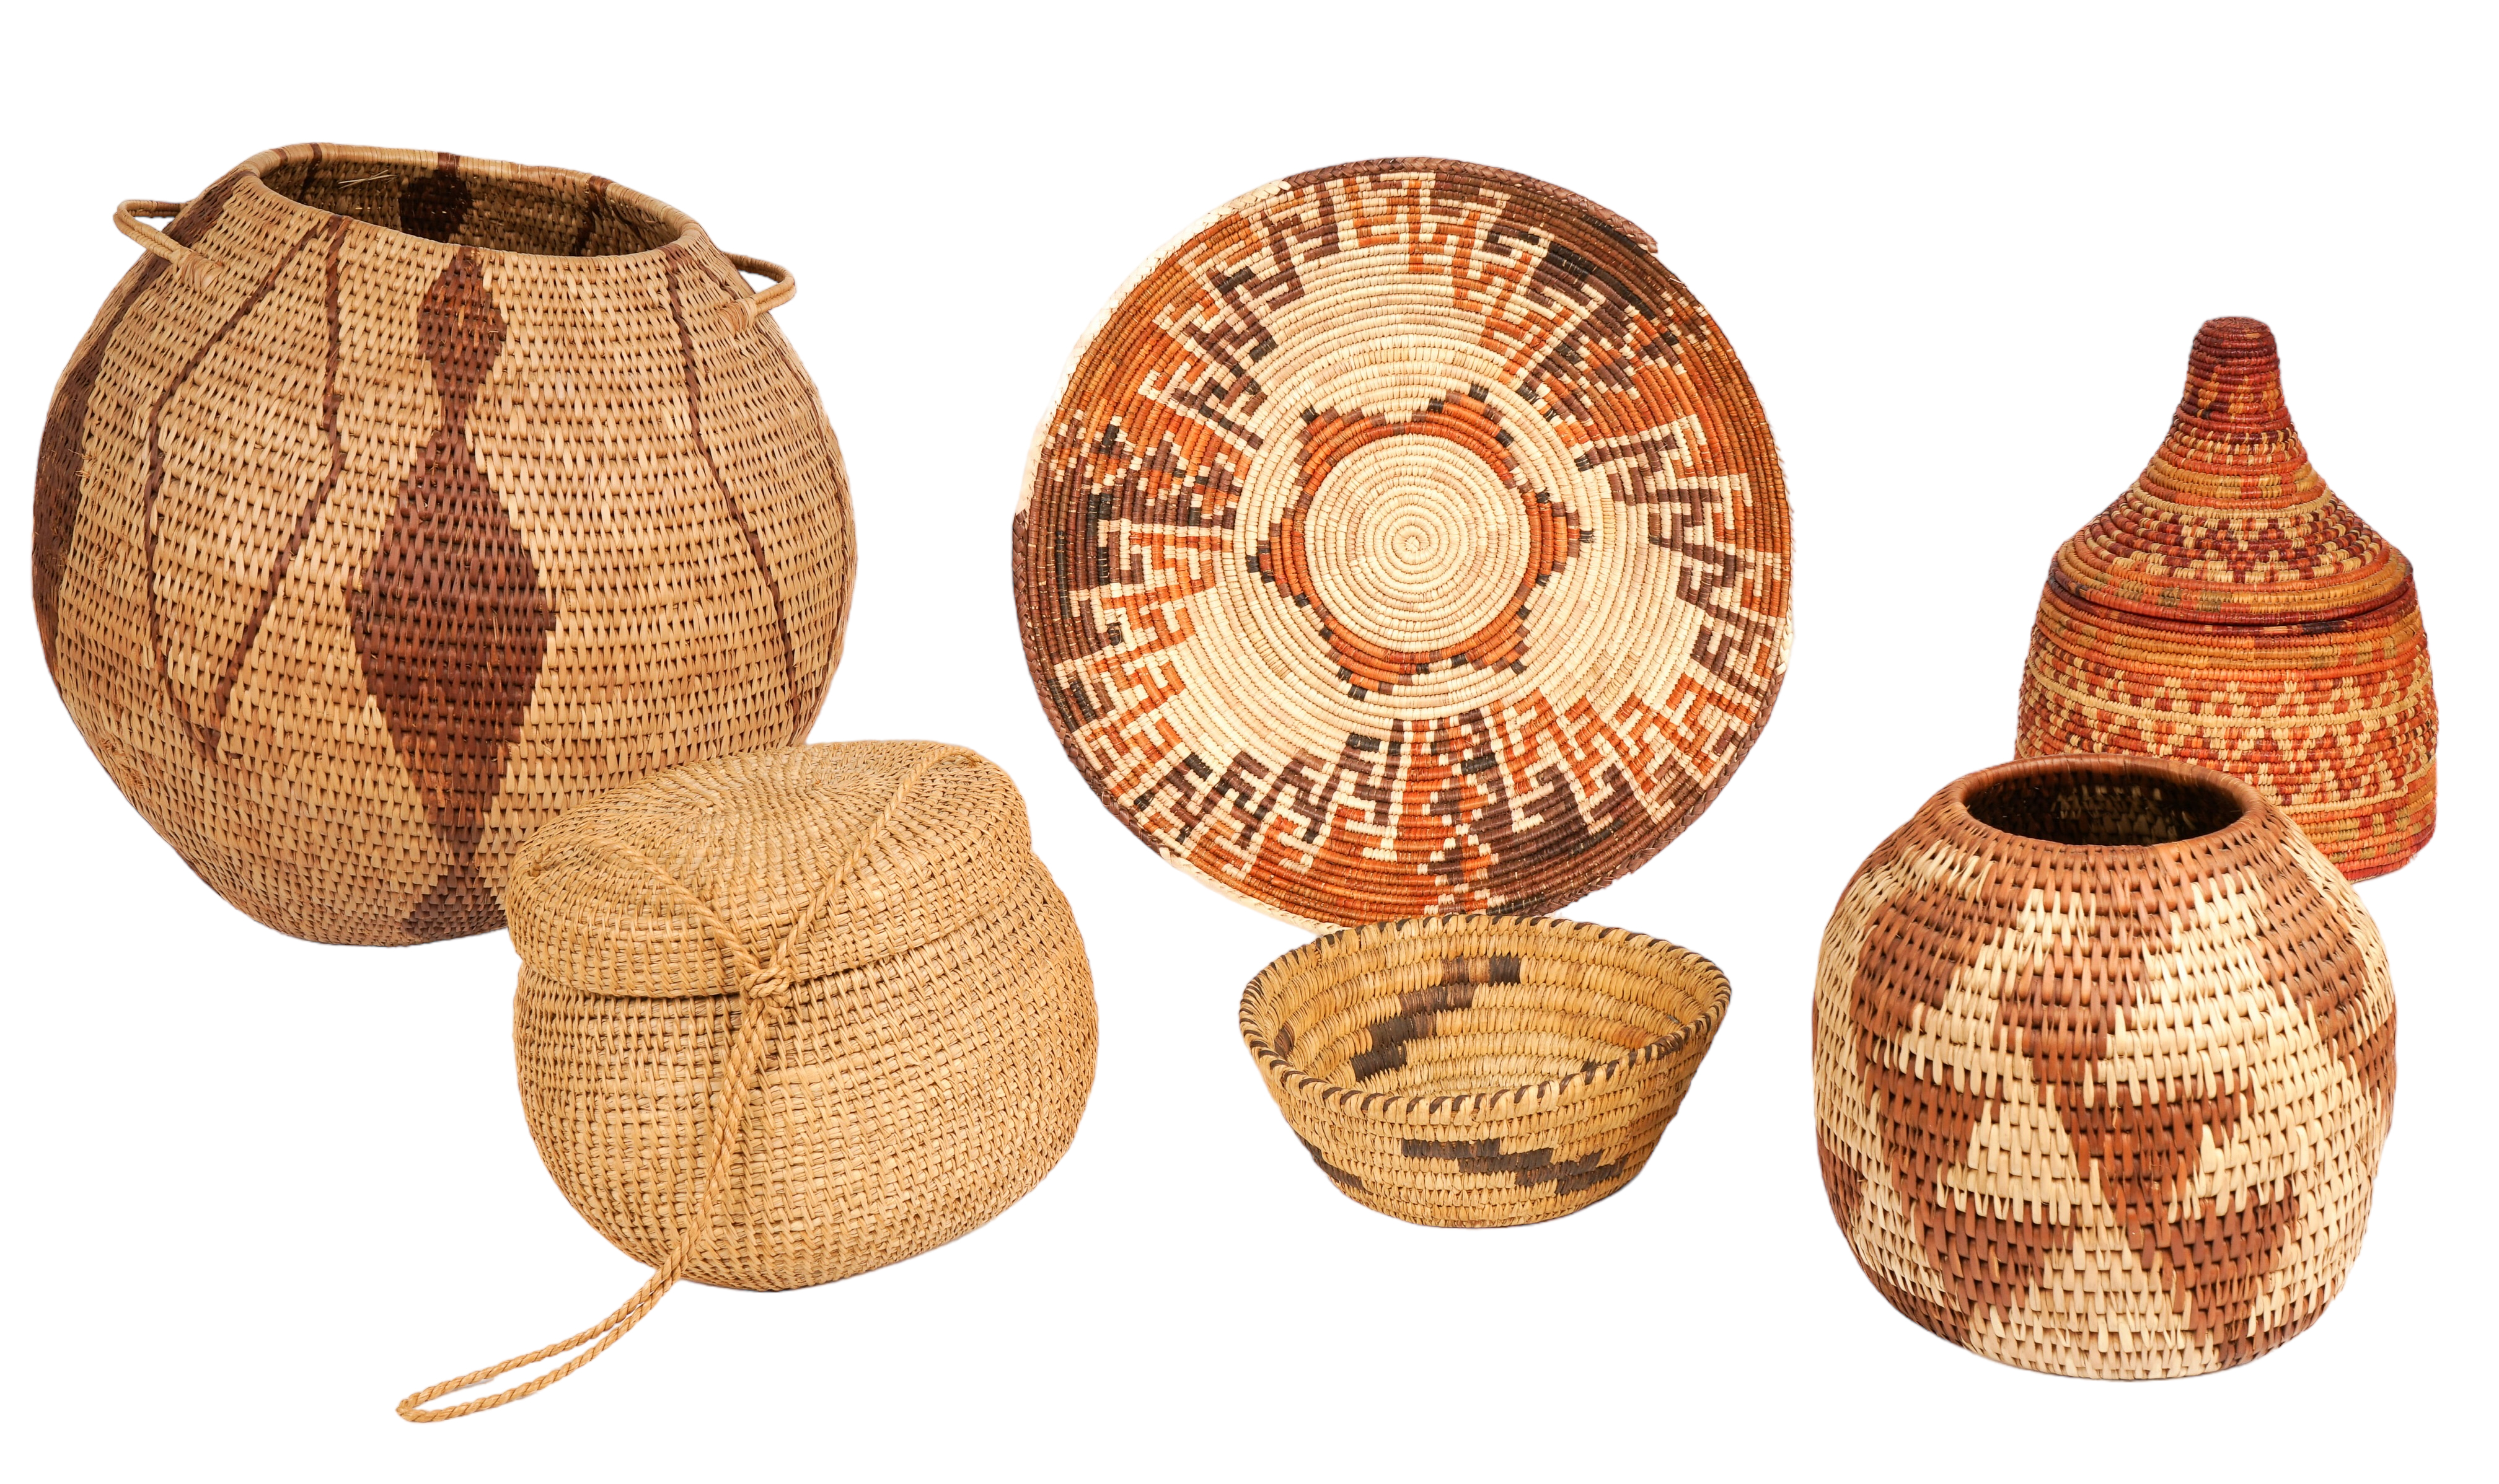  6 Woven baskets and vessels to 2e2453